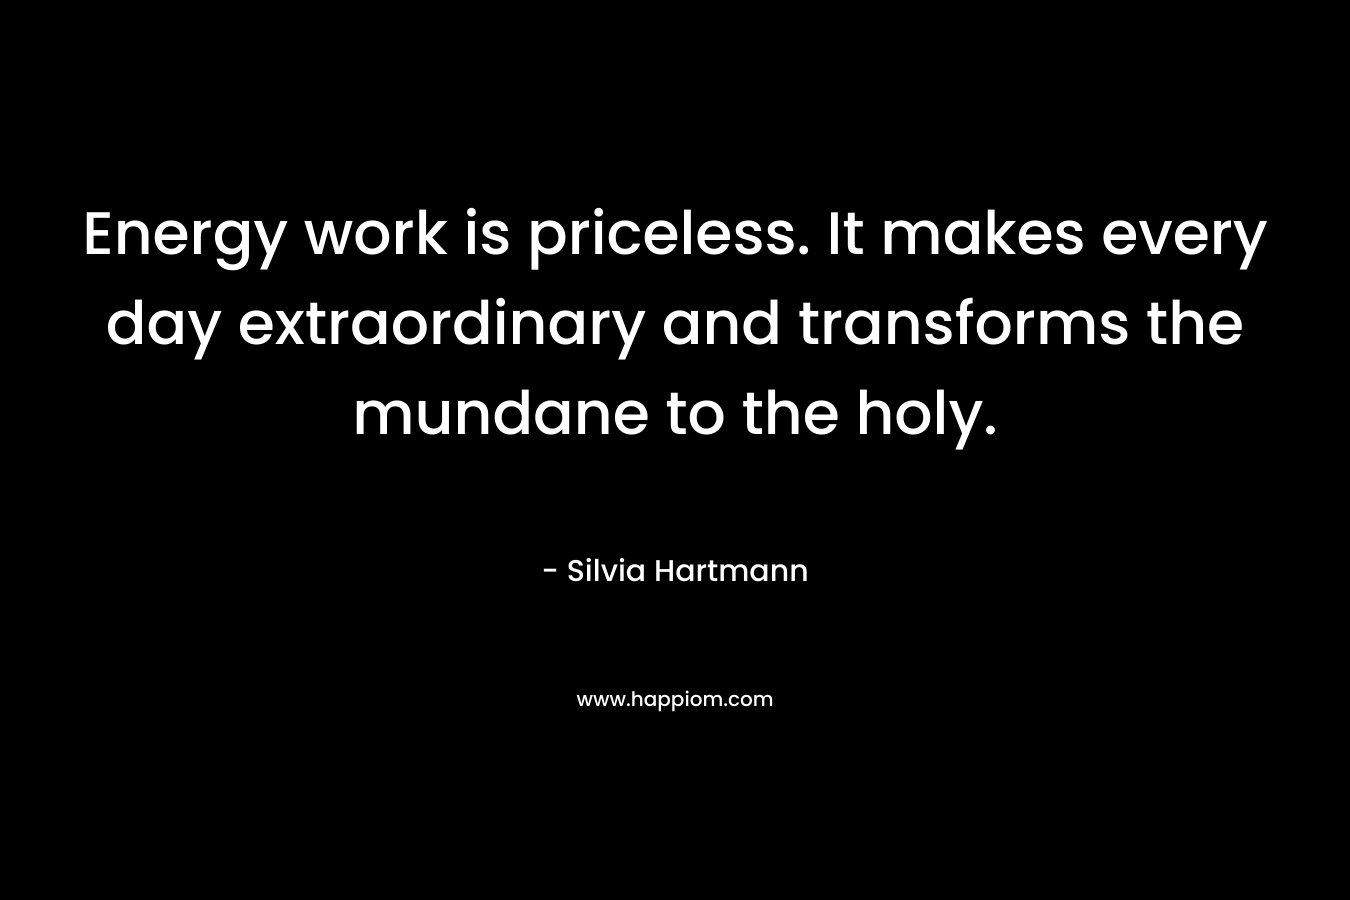 Energy work is priceless. It makes every day extraordinary and transforms the mundane to the holy. – Silvia Hartmann